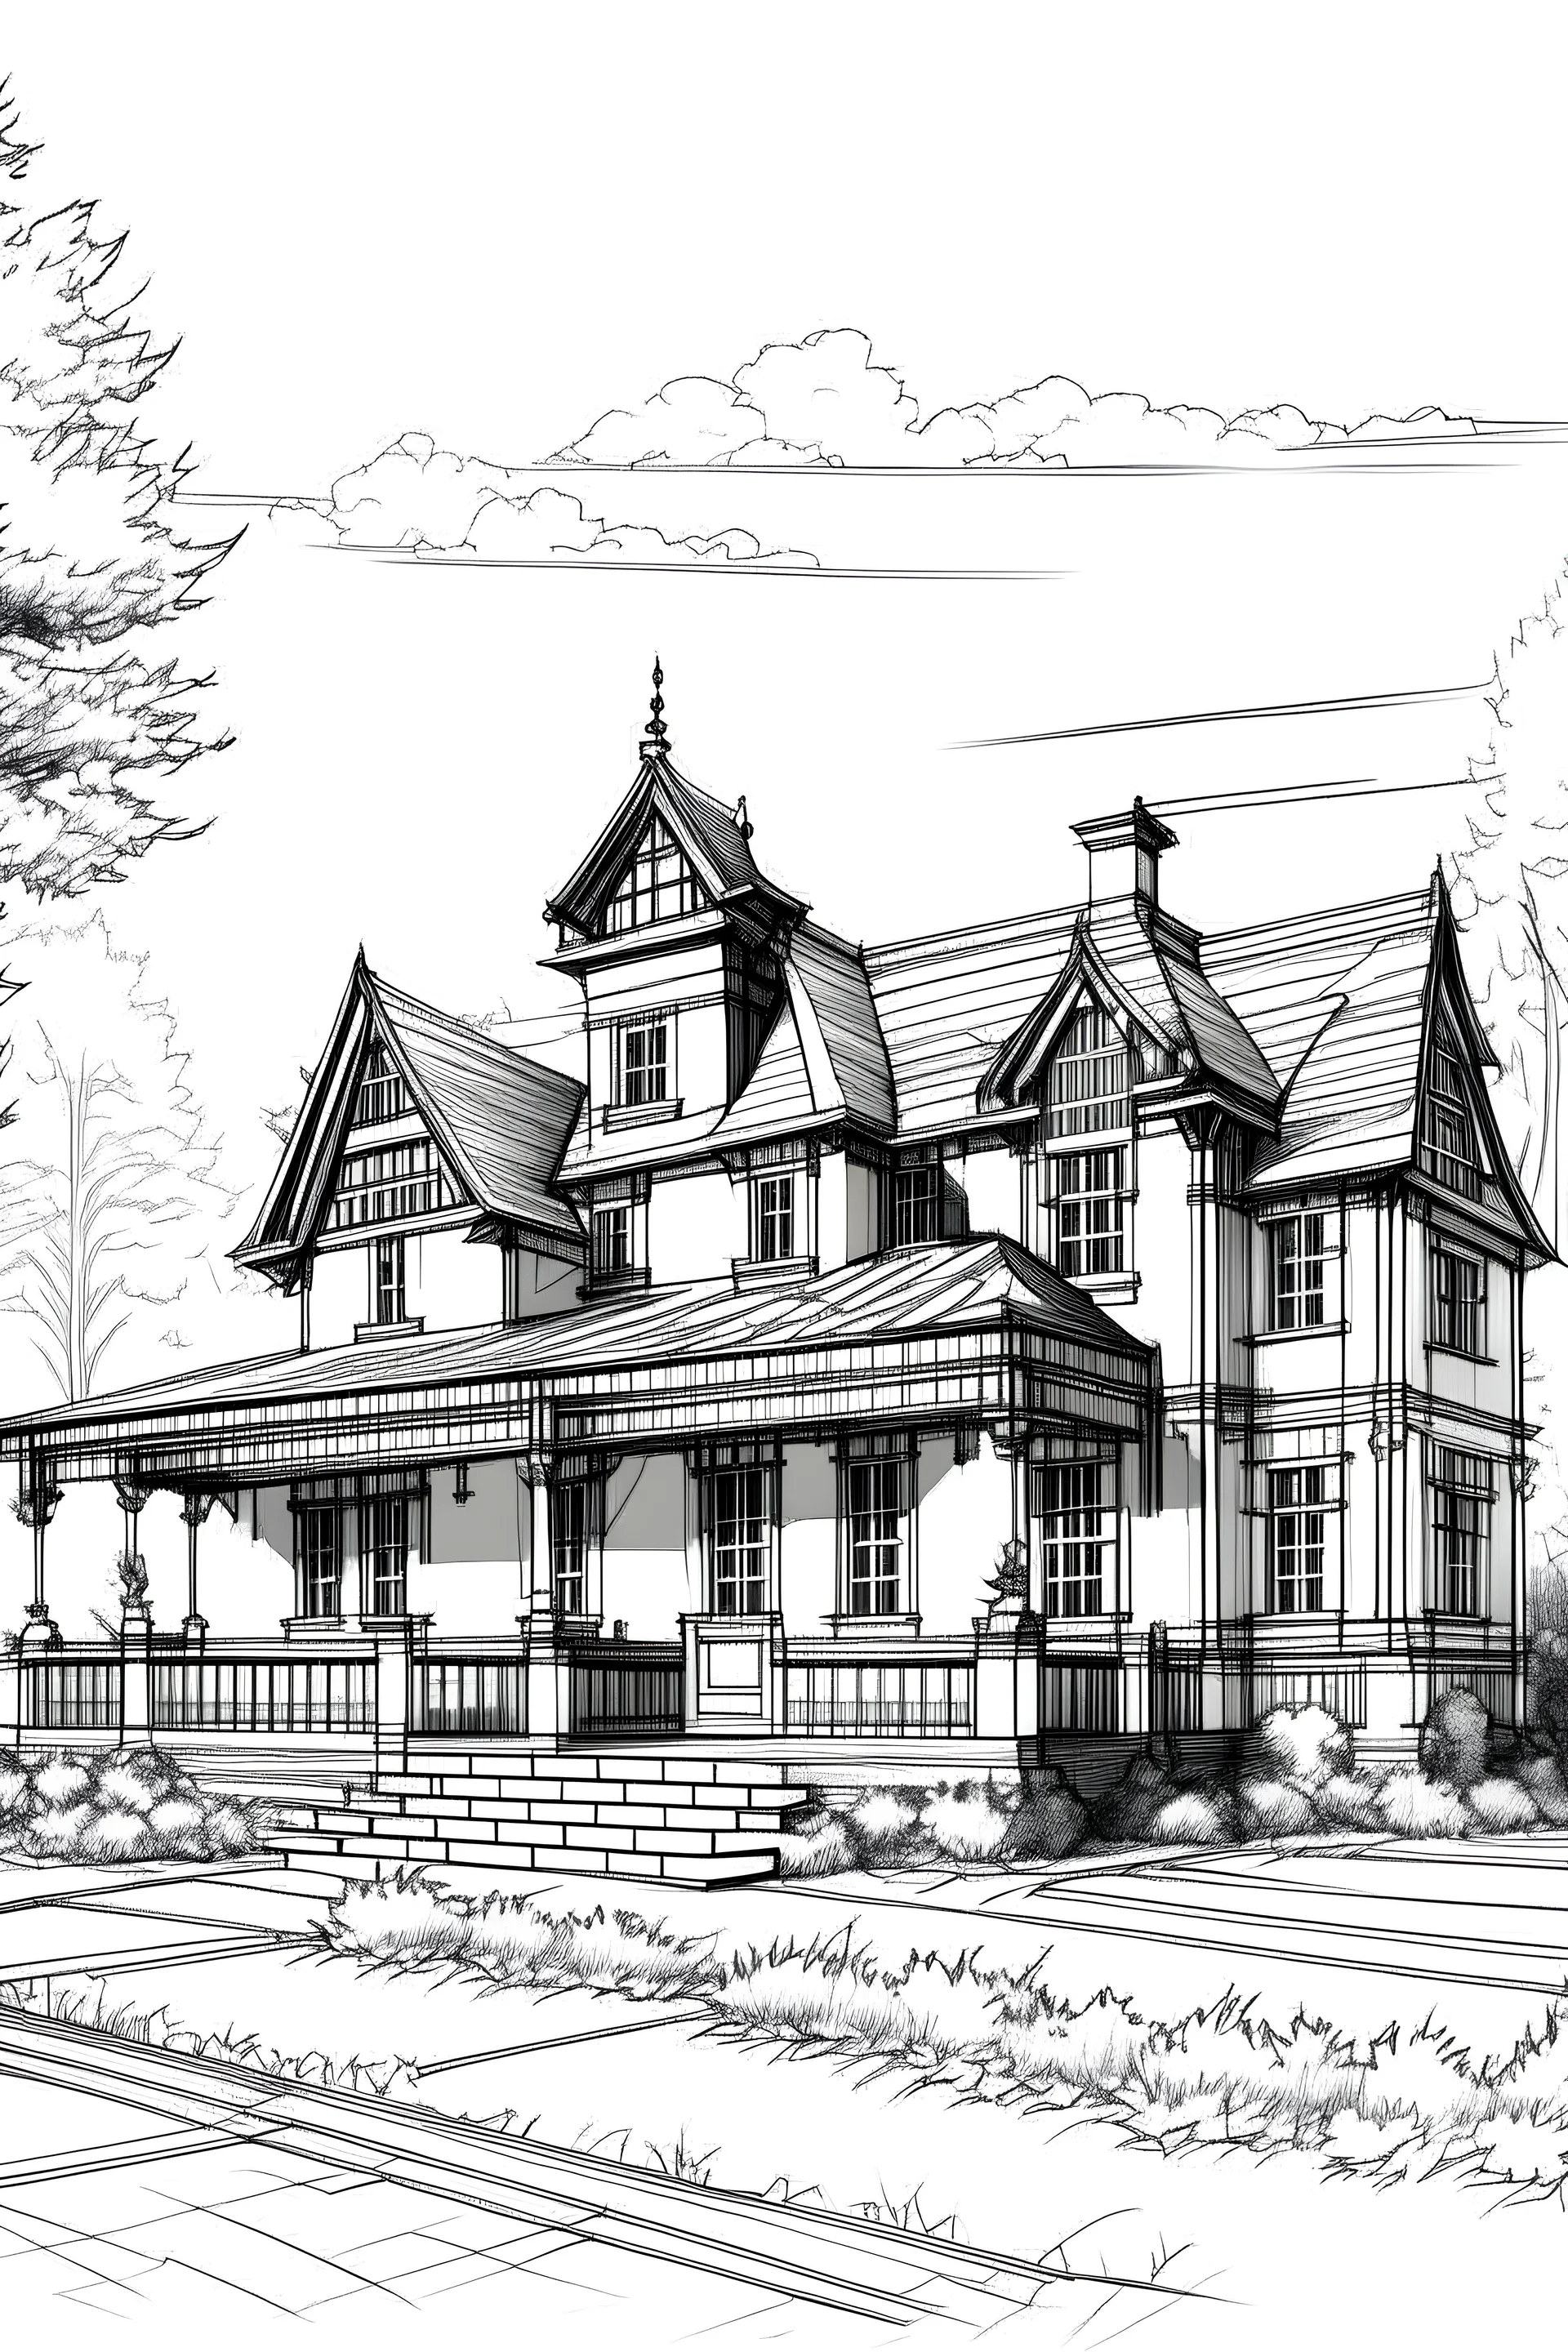 black and white architectural rendering of a luxury HOME styled IN THE FORM OF FRENCH COUNTRY house rough sketch